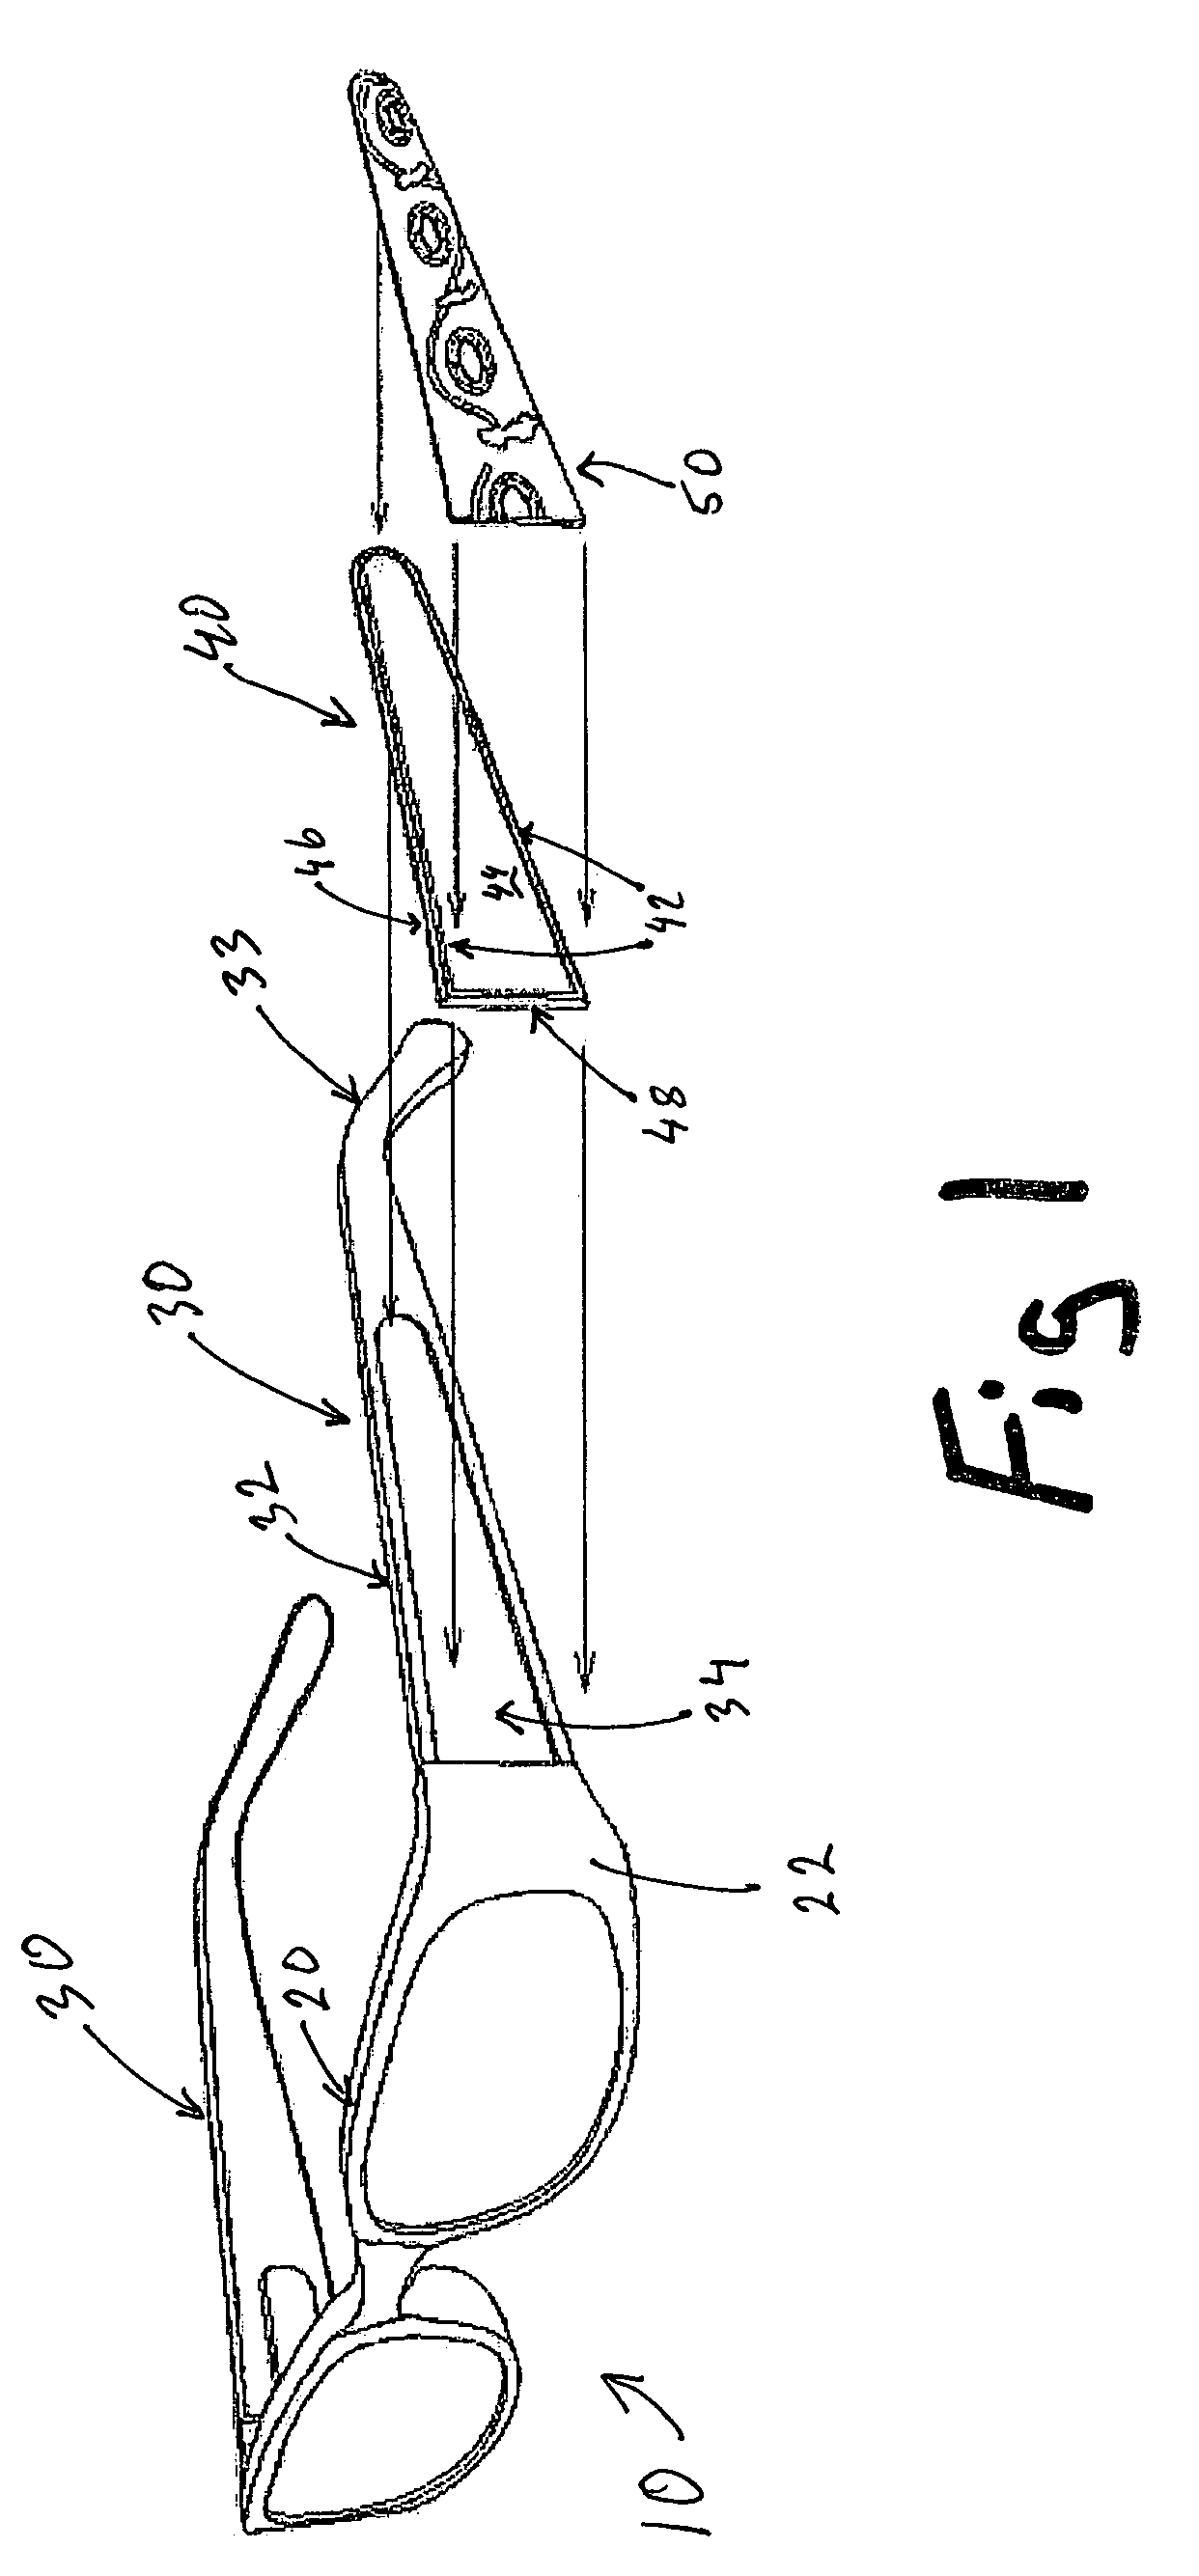 Eyeglass frame with integral channel to receive decorative inserts